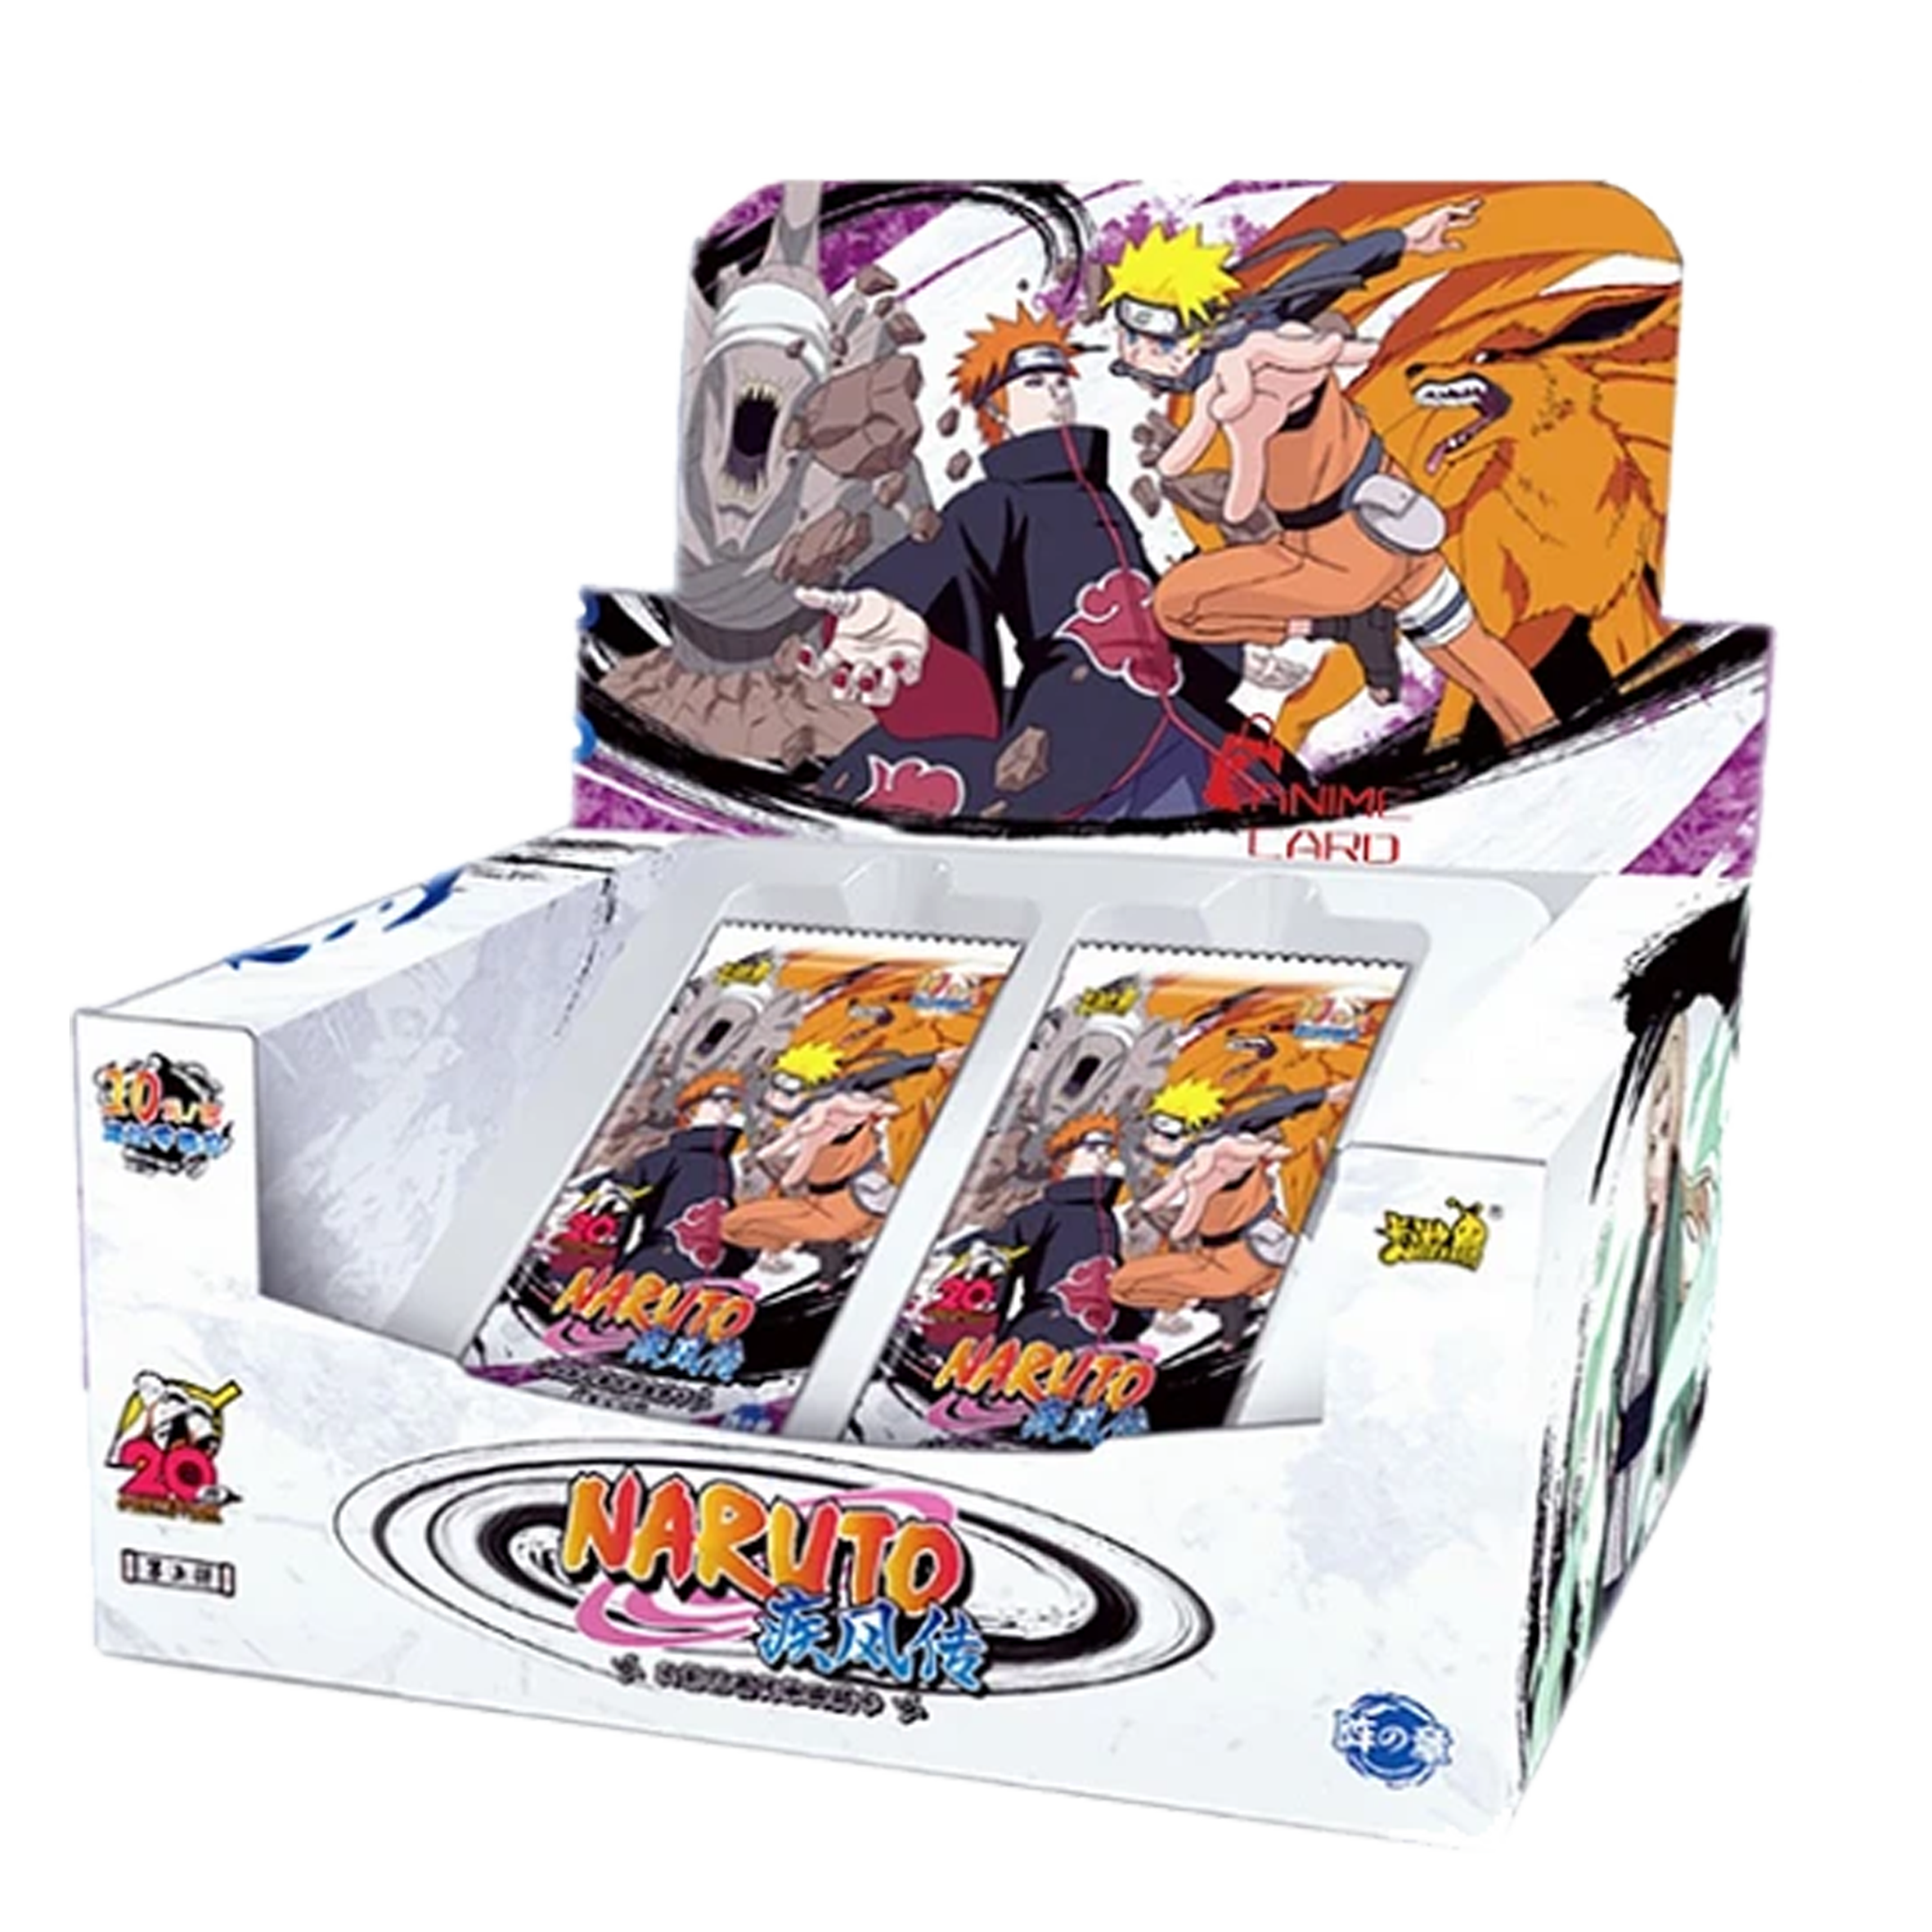 Blister Naruto Kayou 5 Yuan T3W2 4 Boosters + 1 Carte LR promo ! 21 Cartes  à collectionner - Kayou